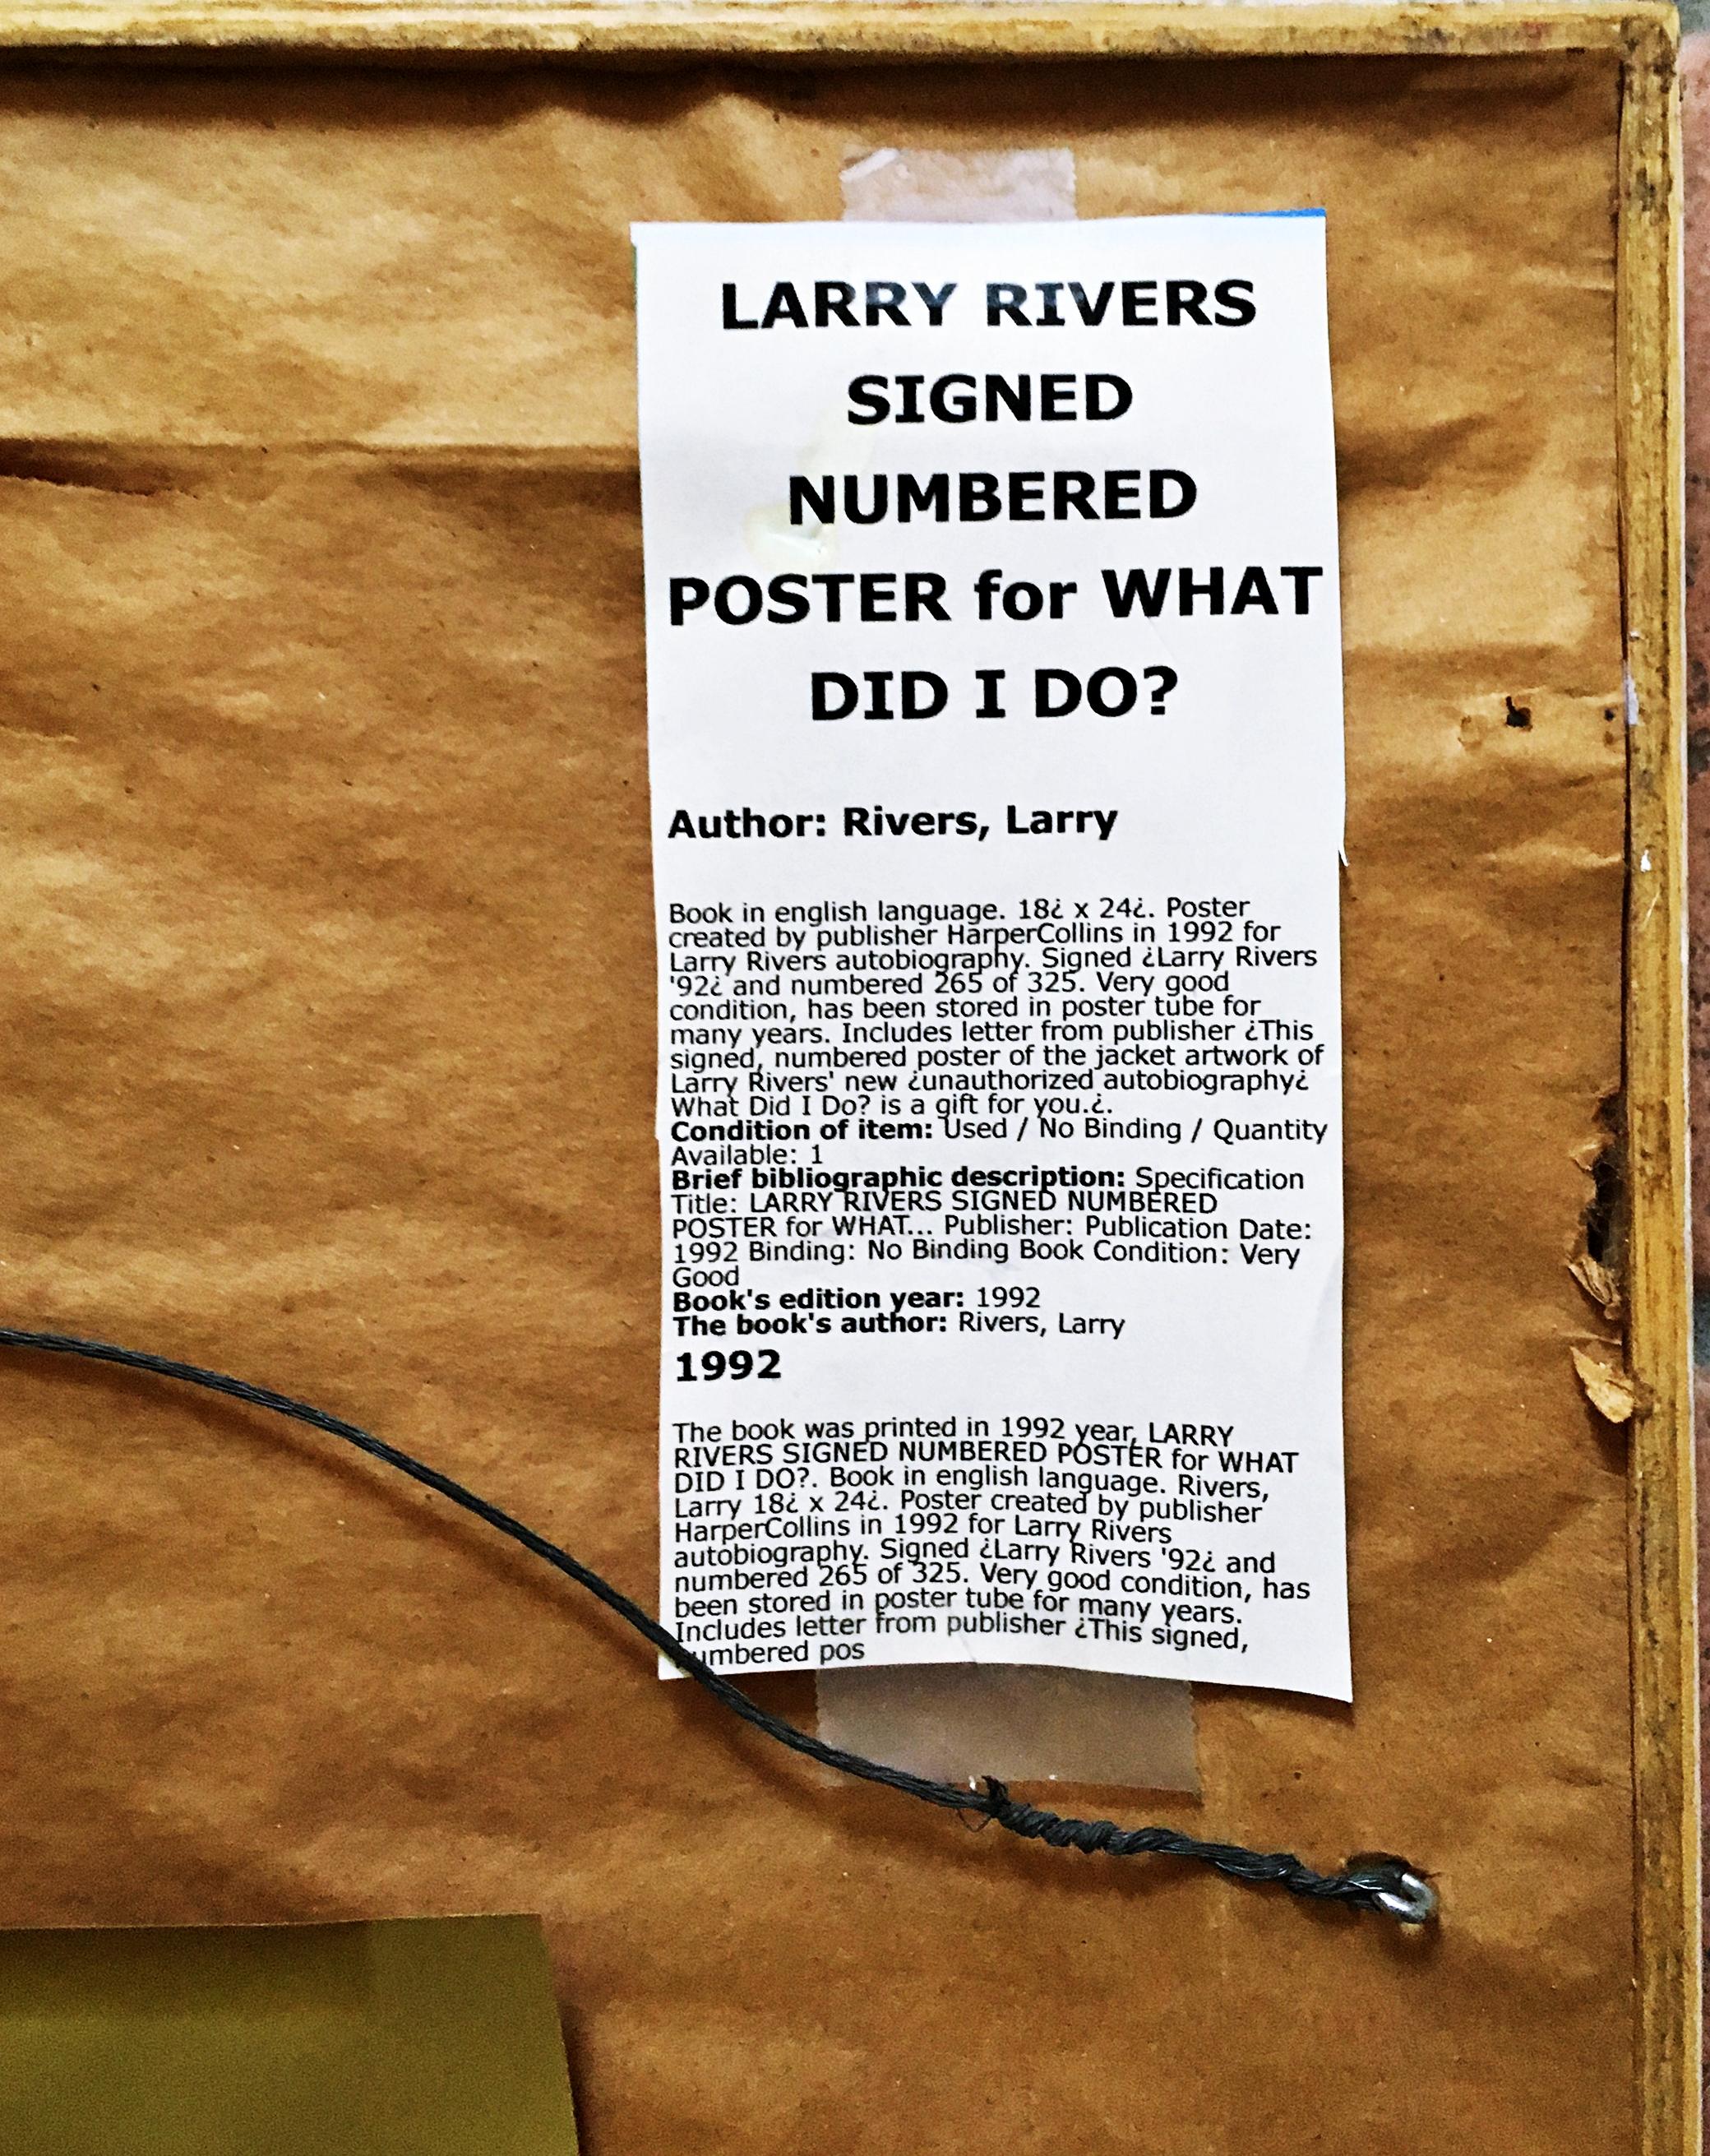 Larry Rivers
What Did I Do? The Unauthorized Biography, 1992
Lithograph on wove paper
Hand signed, numbered 3/325 and dated on lower right front
Frame Included: matted and framed
Terrific vintage offset lithograph promoting 